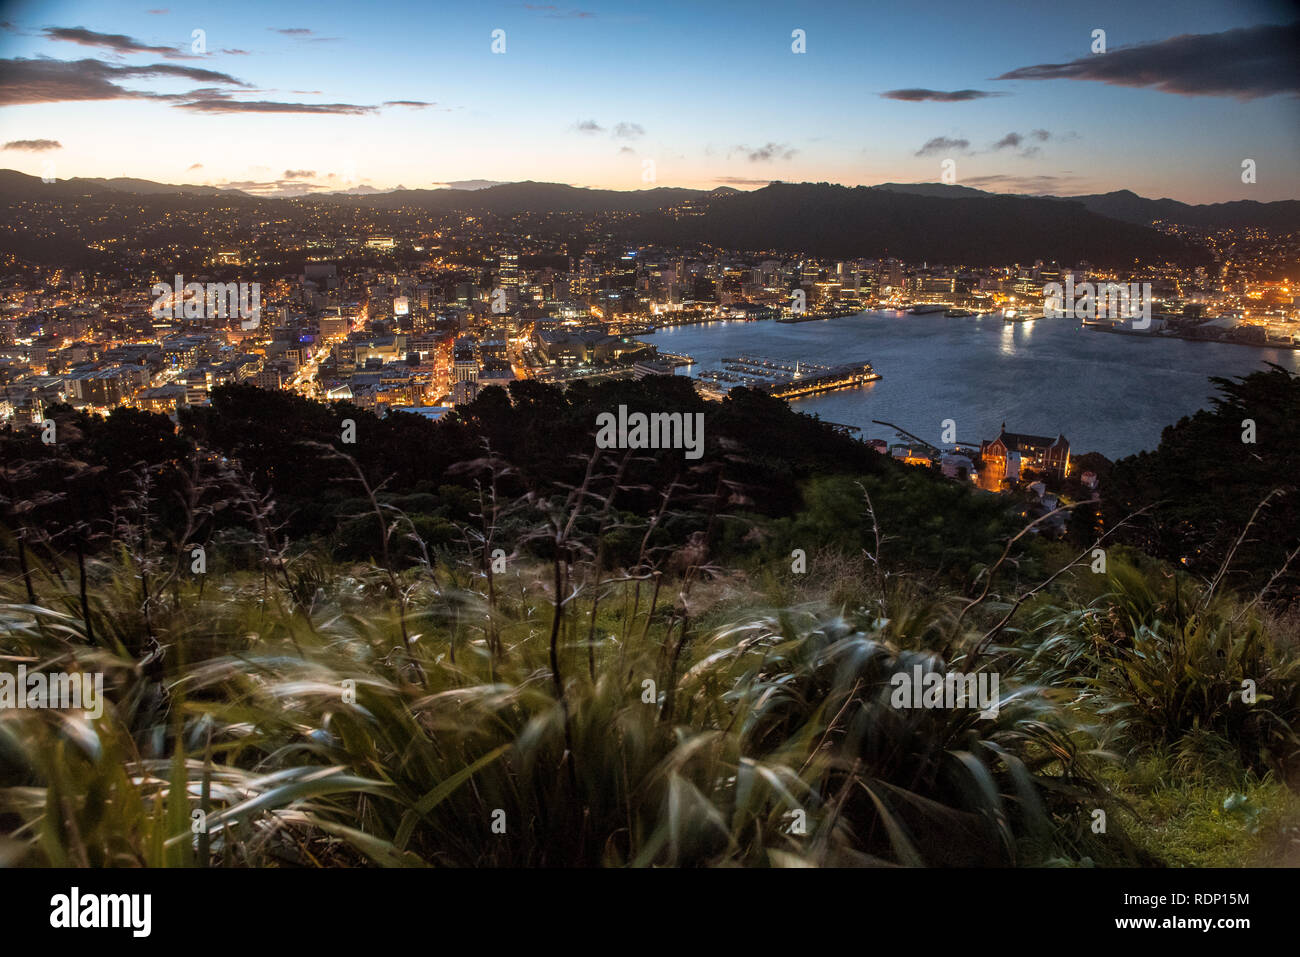 View of central Wellington, New Zealand, taken from the Mount Victoria Overlook. Stock Photo